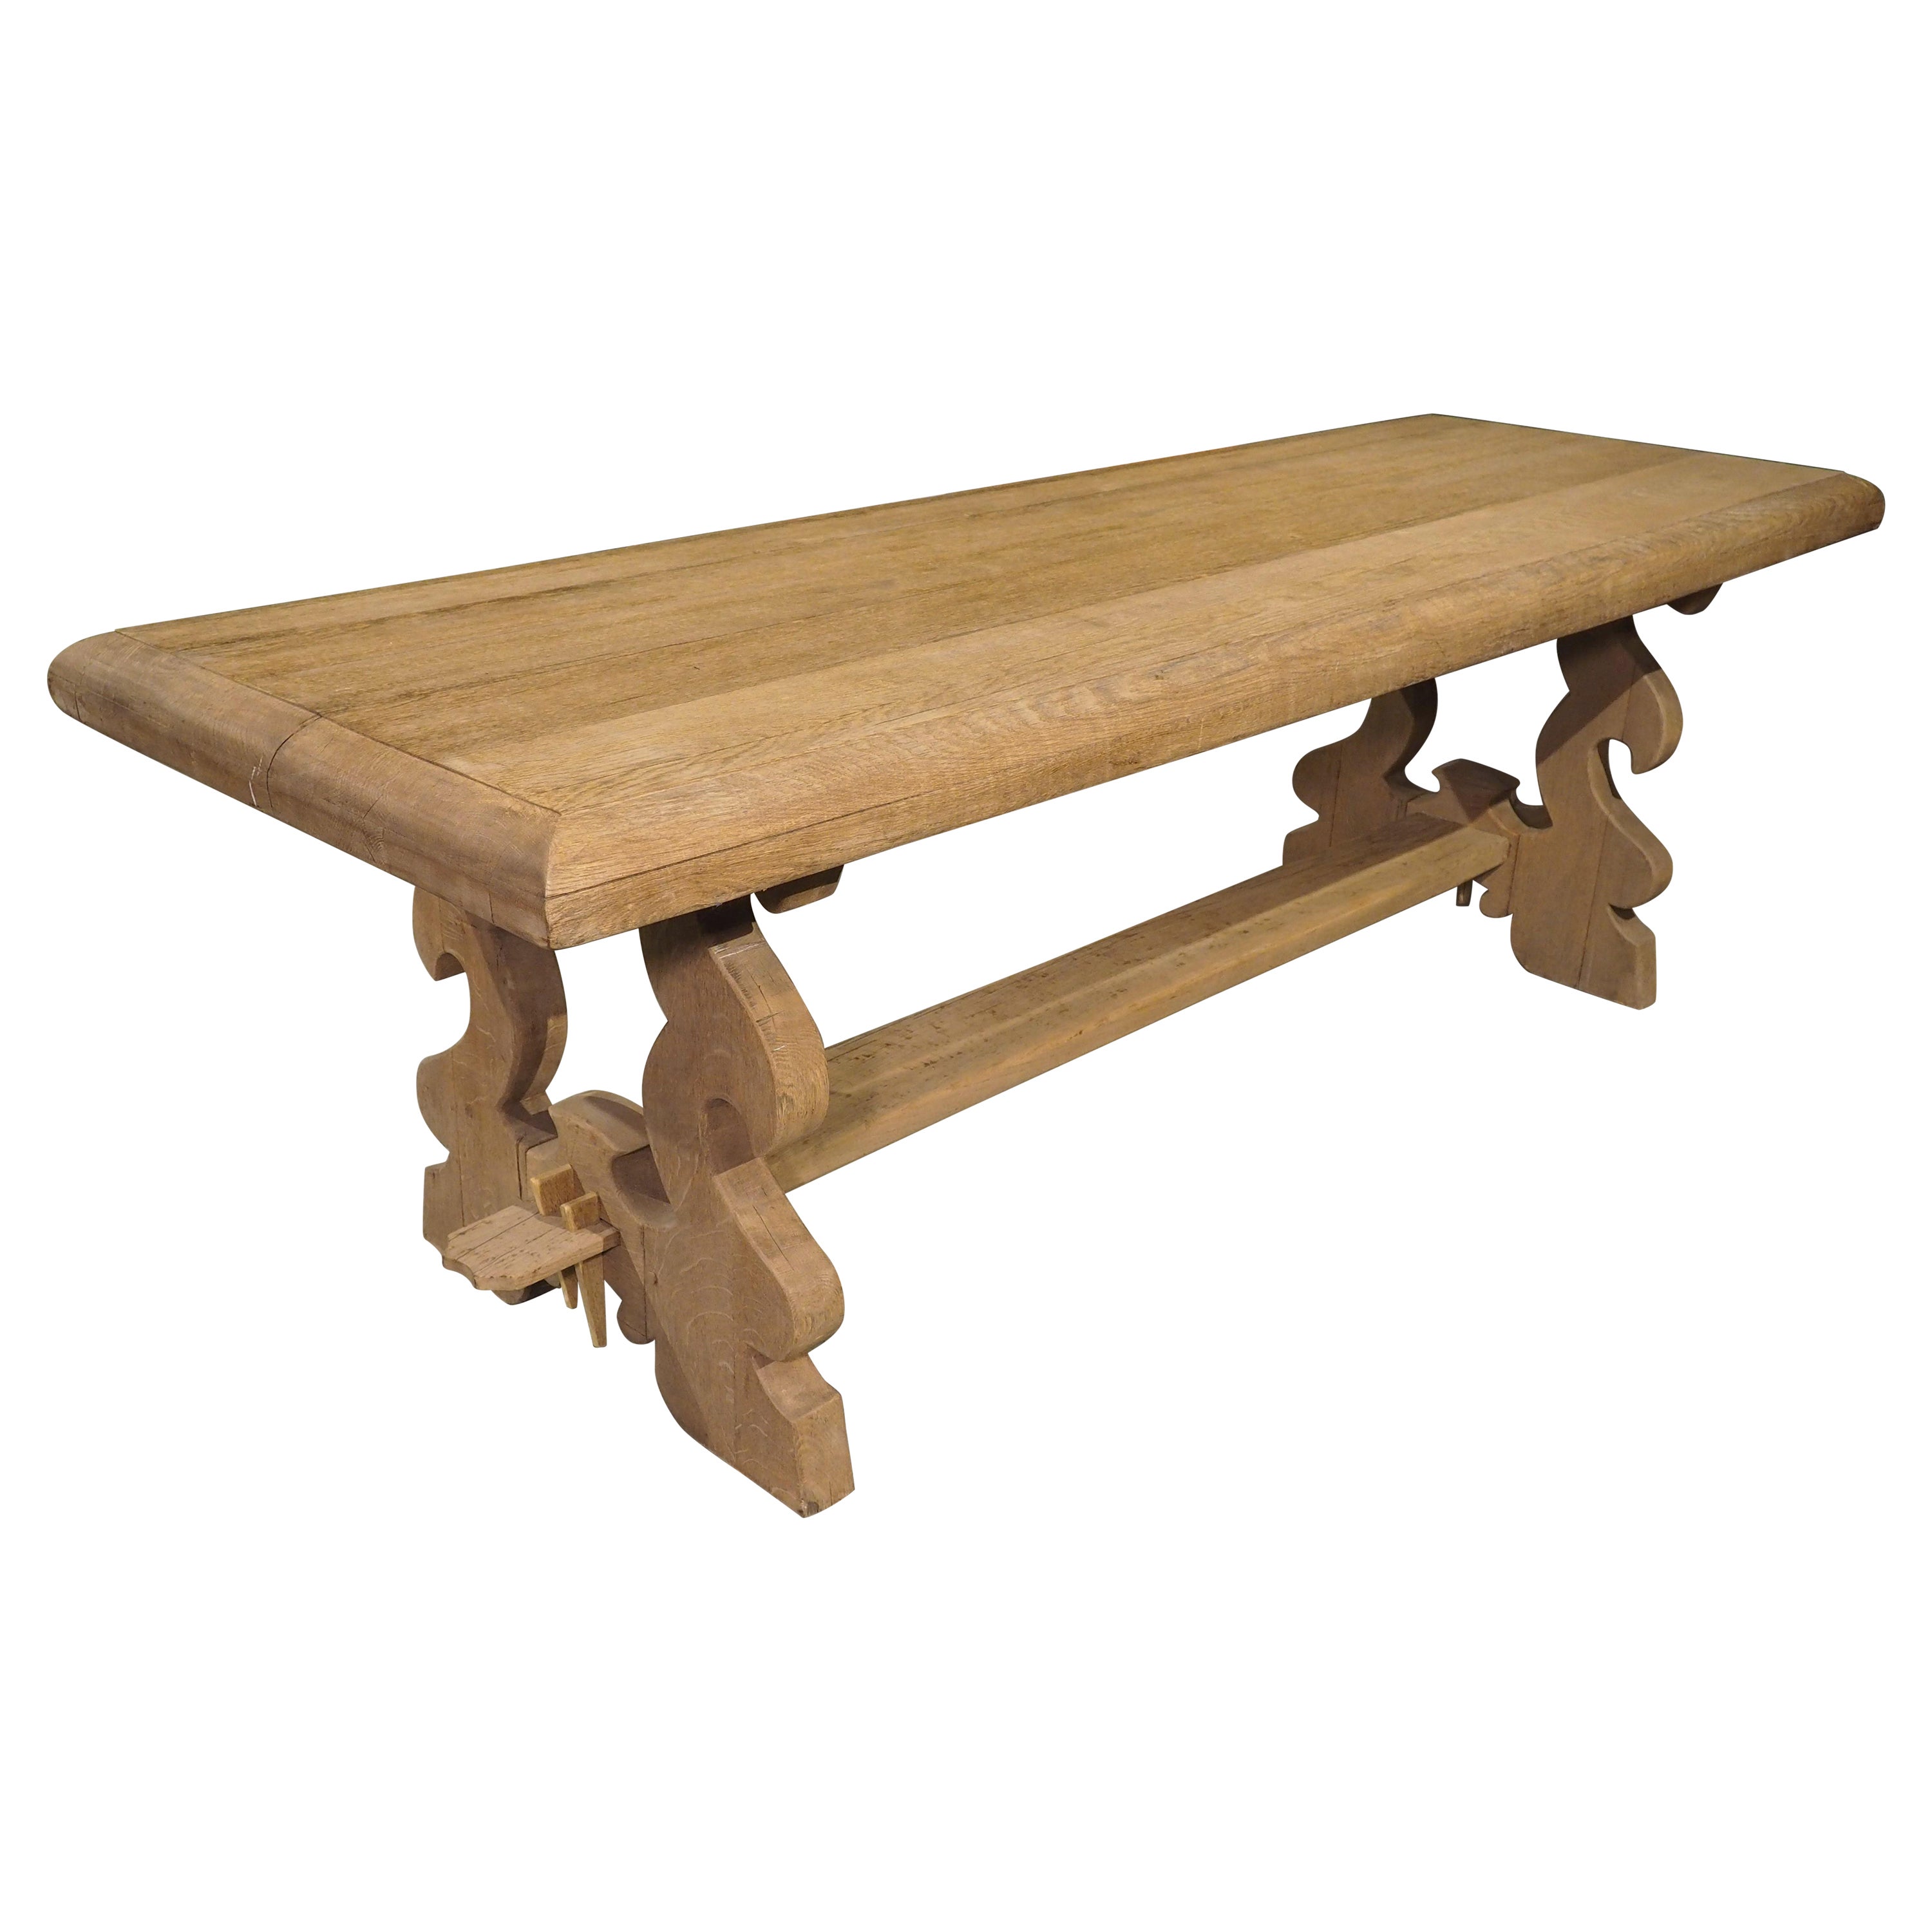 Bleached Italian Baroque Style Oak Trestle Table with Lyre Shaped Legs